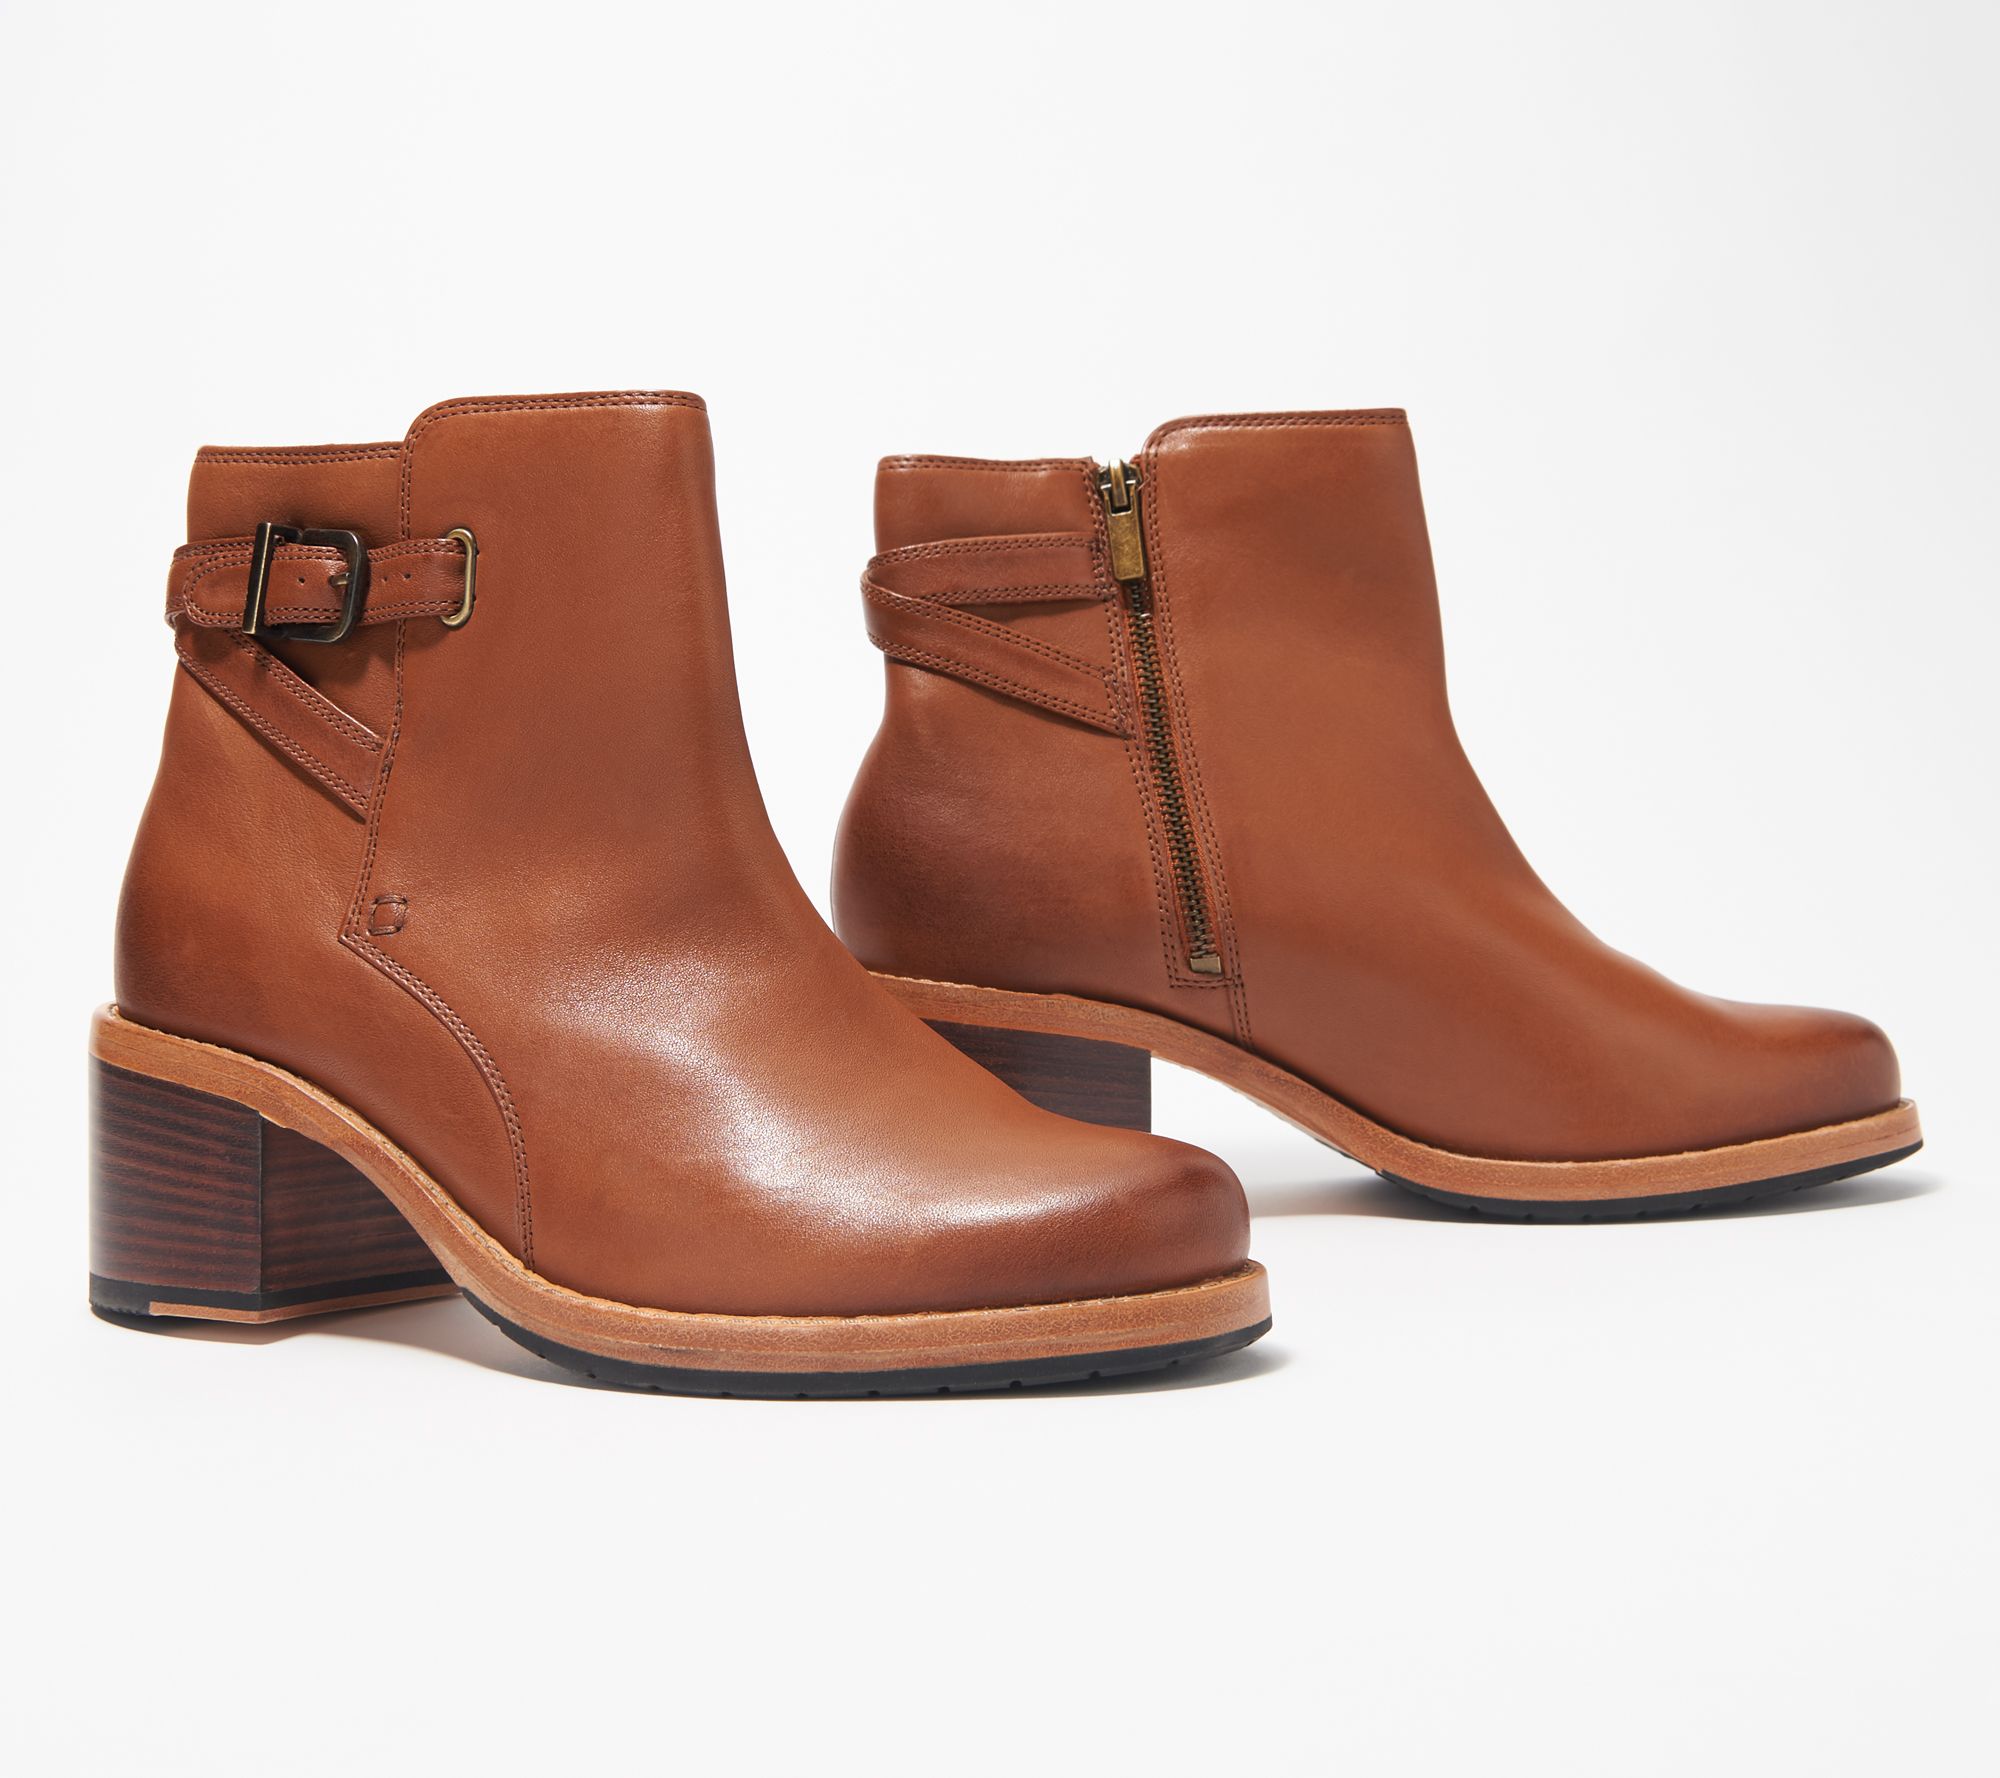 Clarks Leather Ankle Boots w/ Buckle 